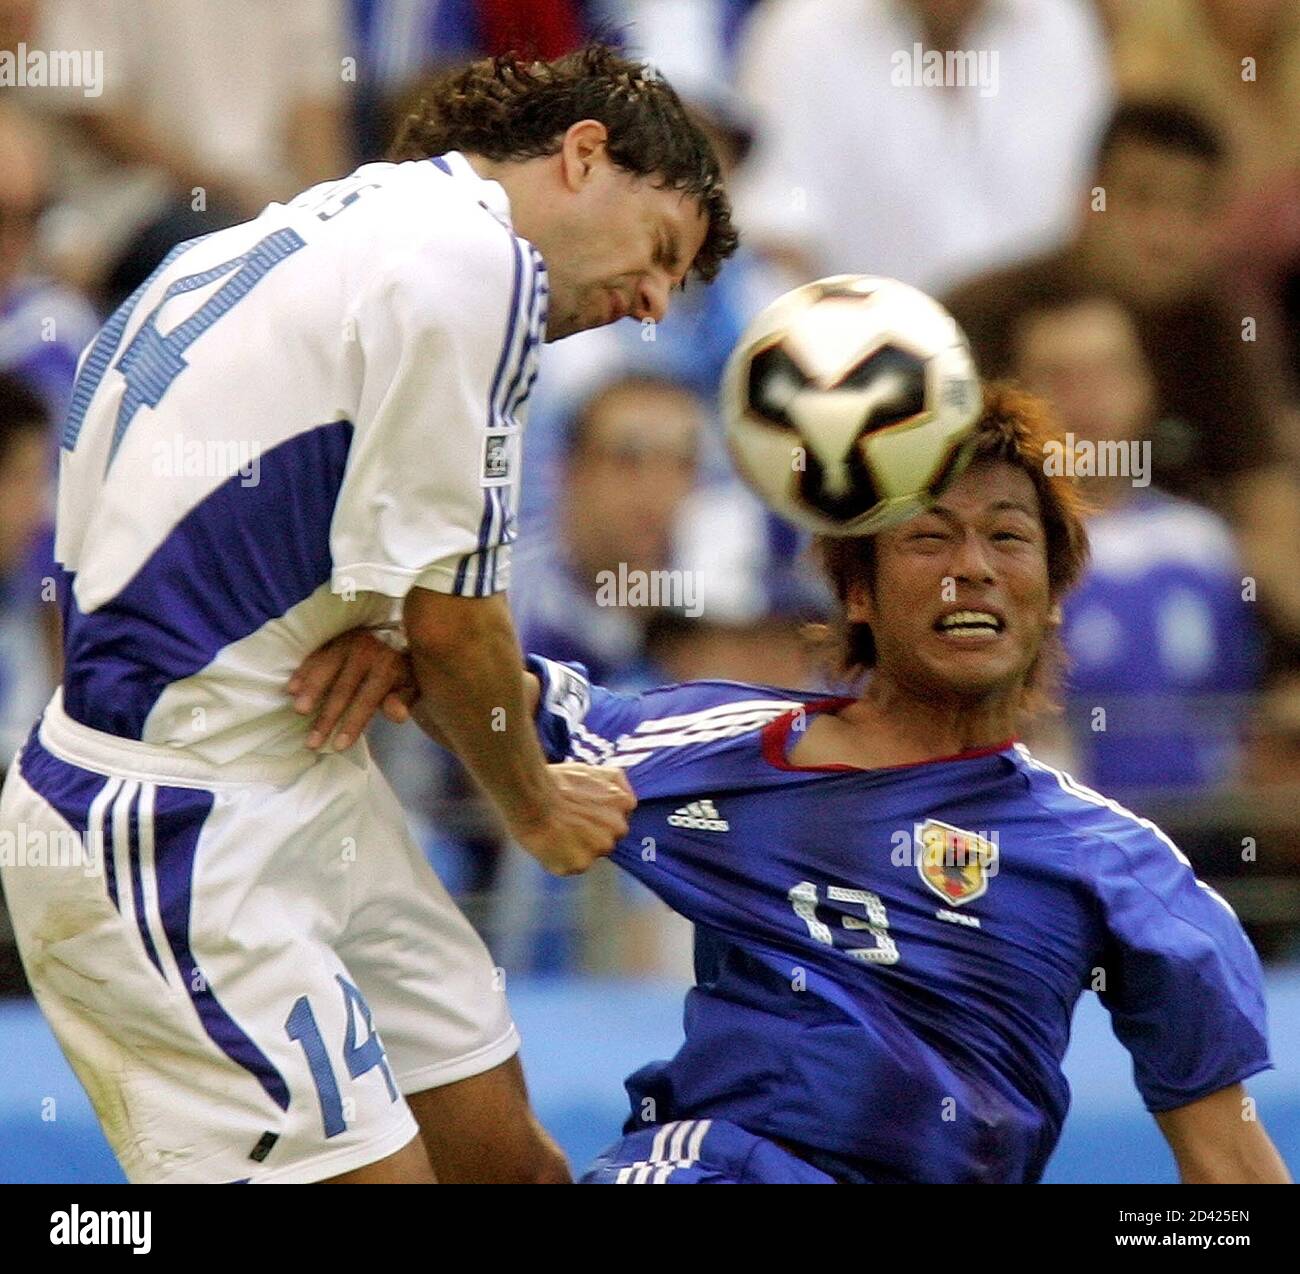 Greece's Takis Fyssas (L) challenges Japan's Atsushi Yanagisawa during  their Confederations Cup soccer match in Frankfurt, June 19, 2005.  REUTERS/Thomas Bohlen TB/AA Stock Photo - Alamy